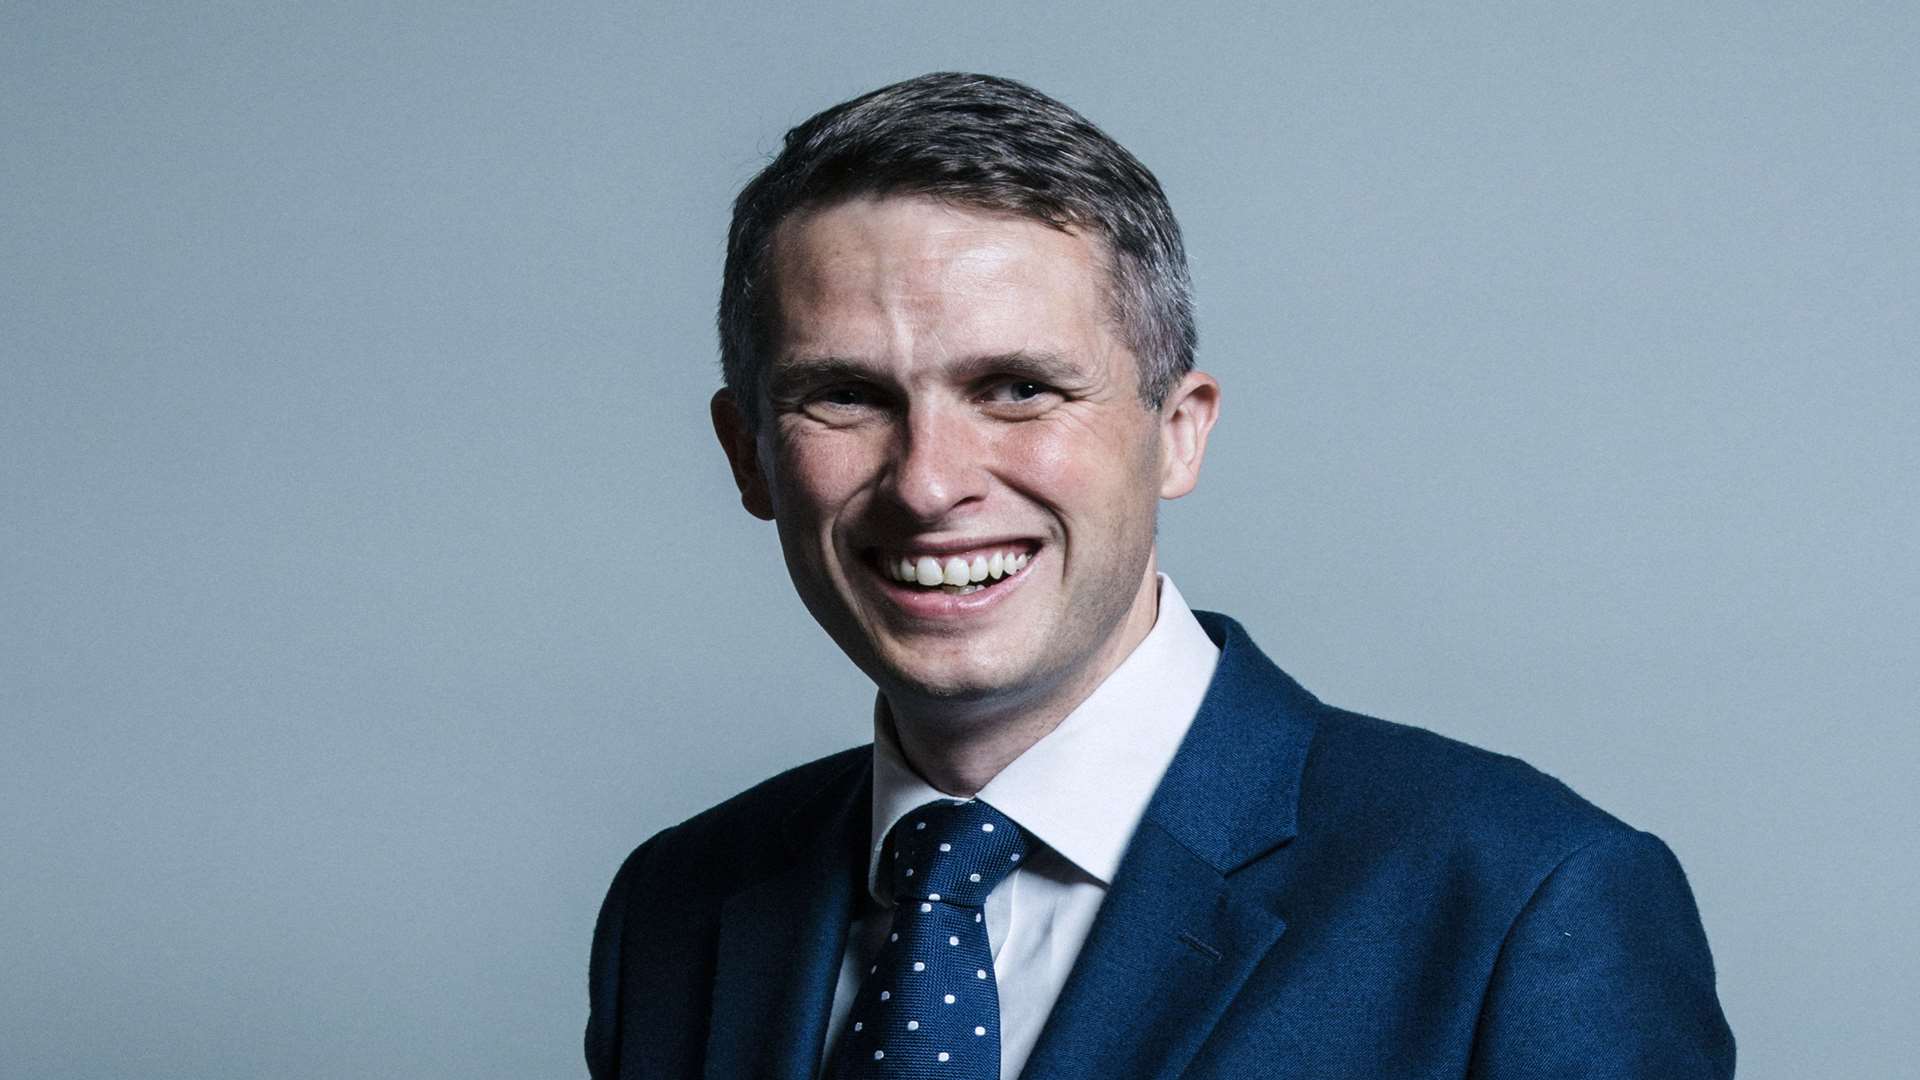 Gavin Williamson MP has been appointed defence secretary